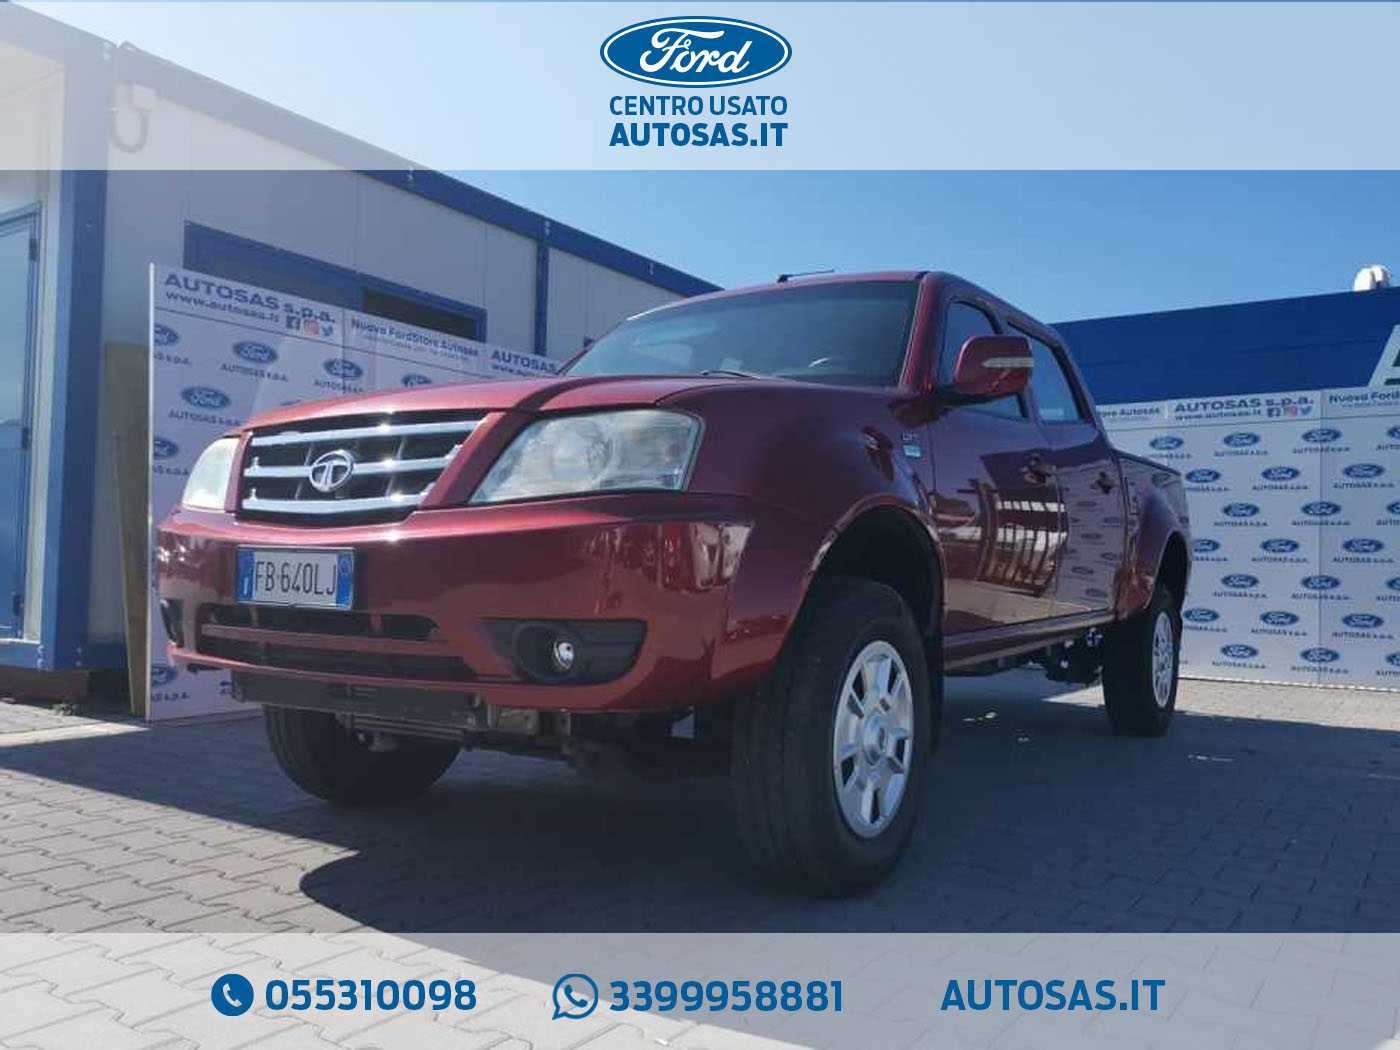 Tata Xenon Off-Road/Pick-up in Red used in Firenze - Fi for € 15,000.-